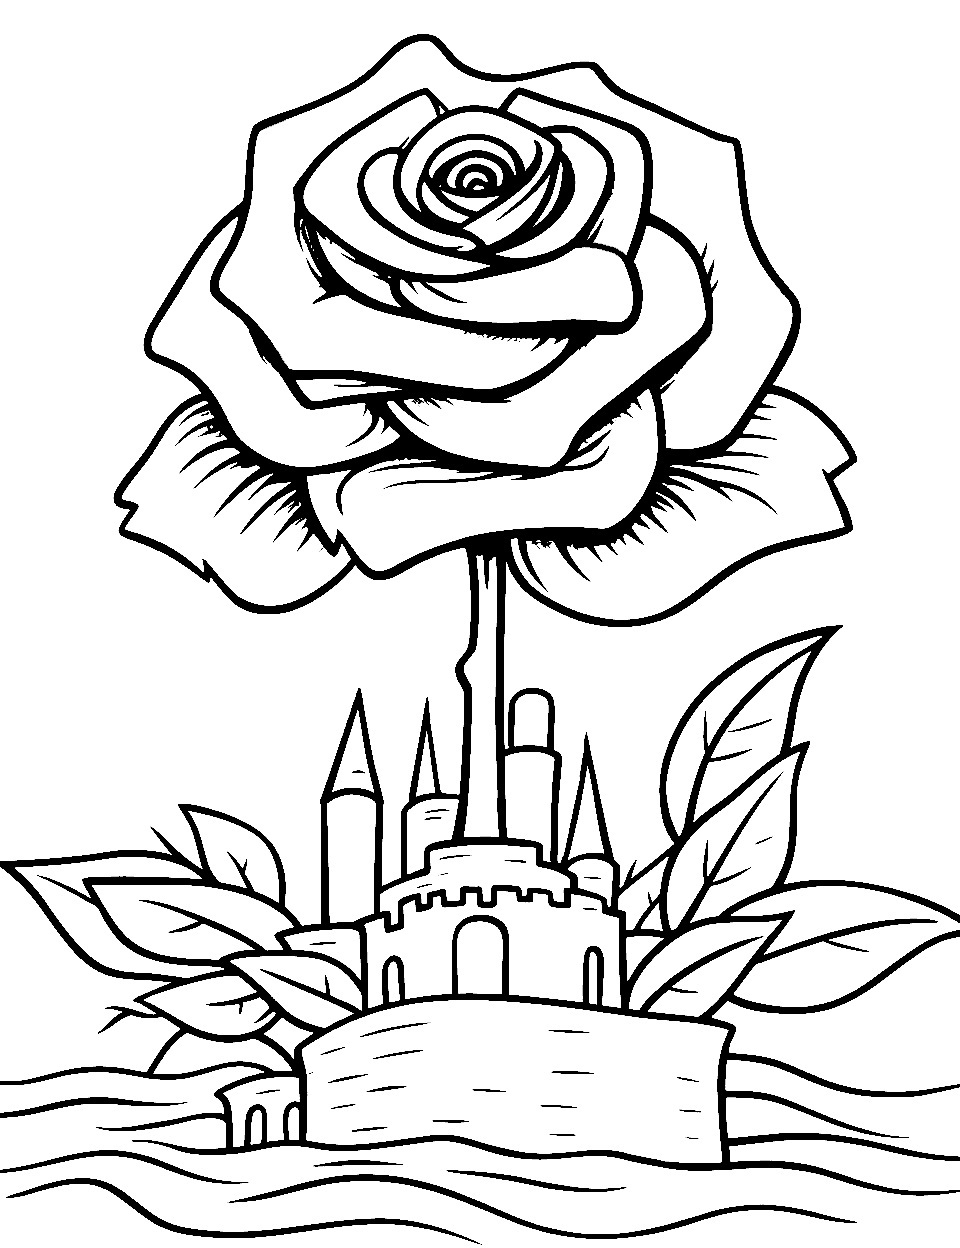 Rose in a Sandcastle Coloring Page - A single rose placed atop a simple and small kid-made sandcastle.